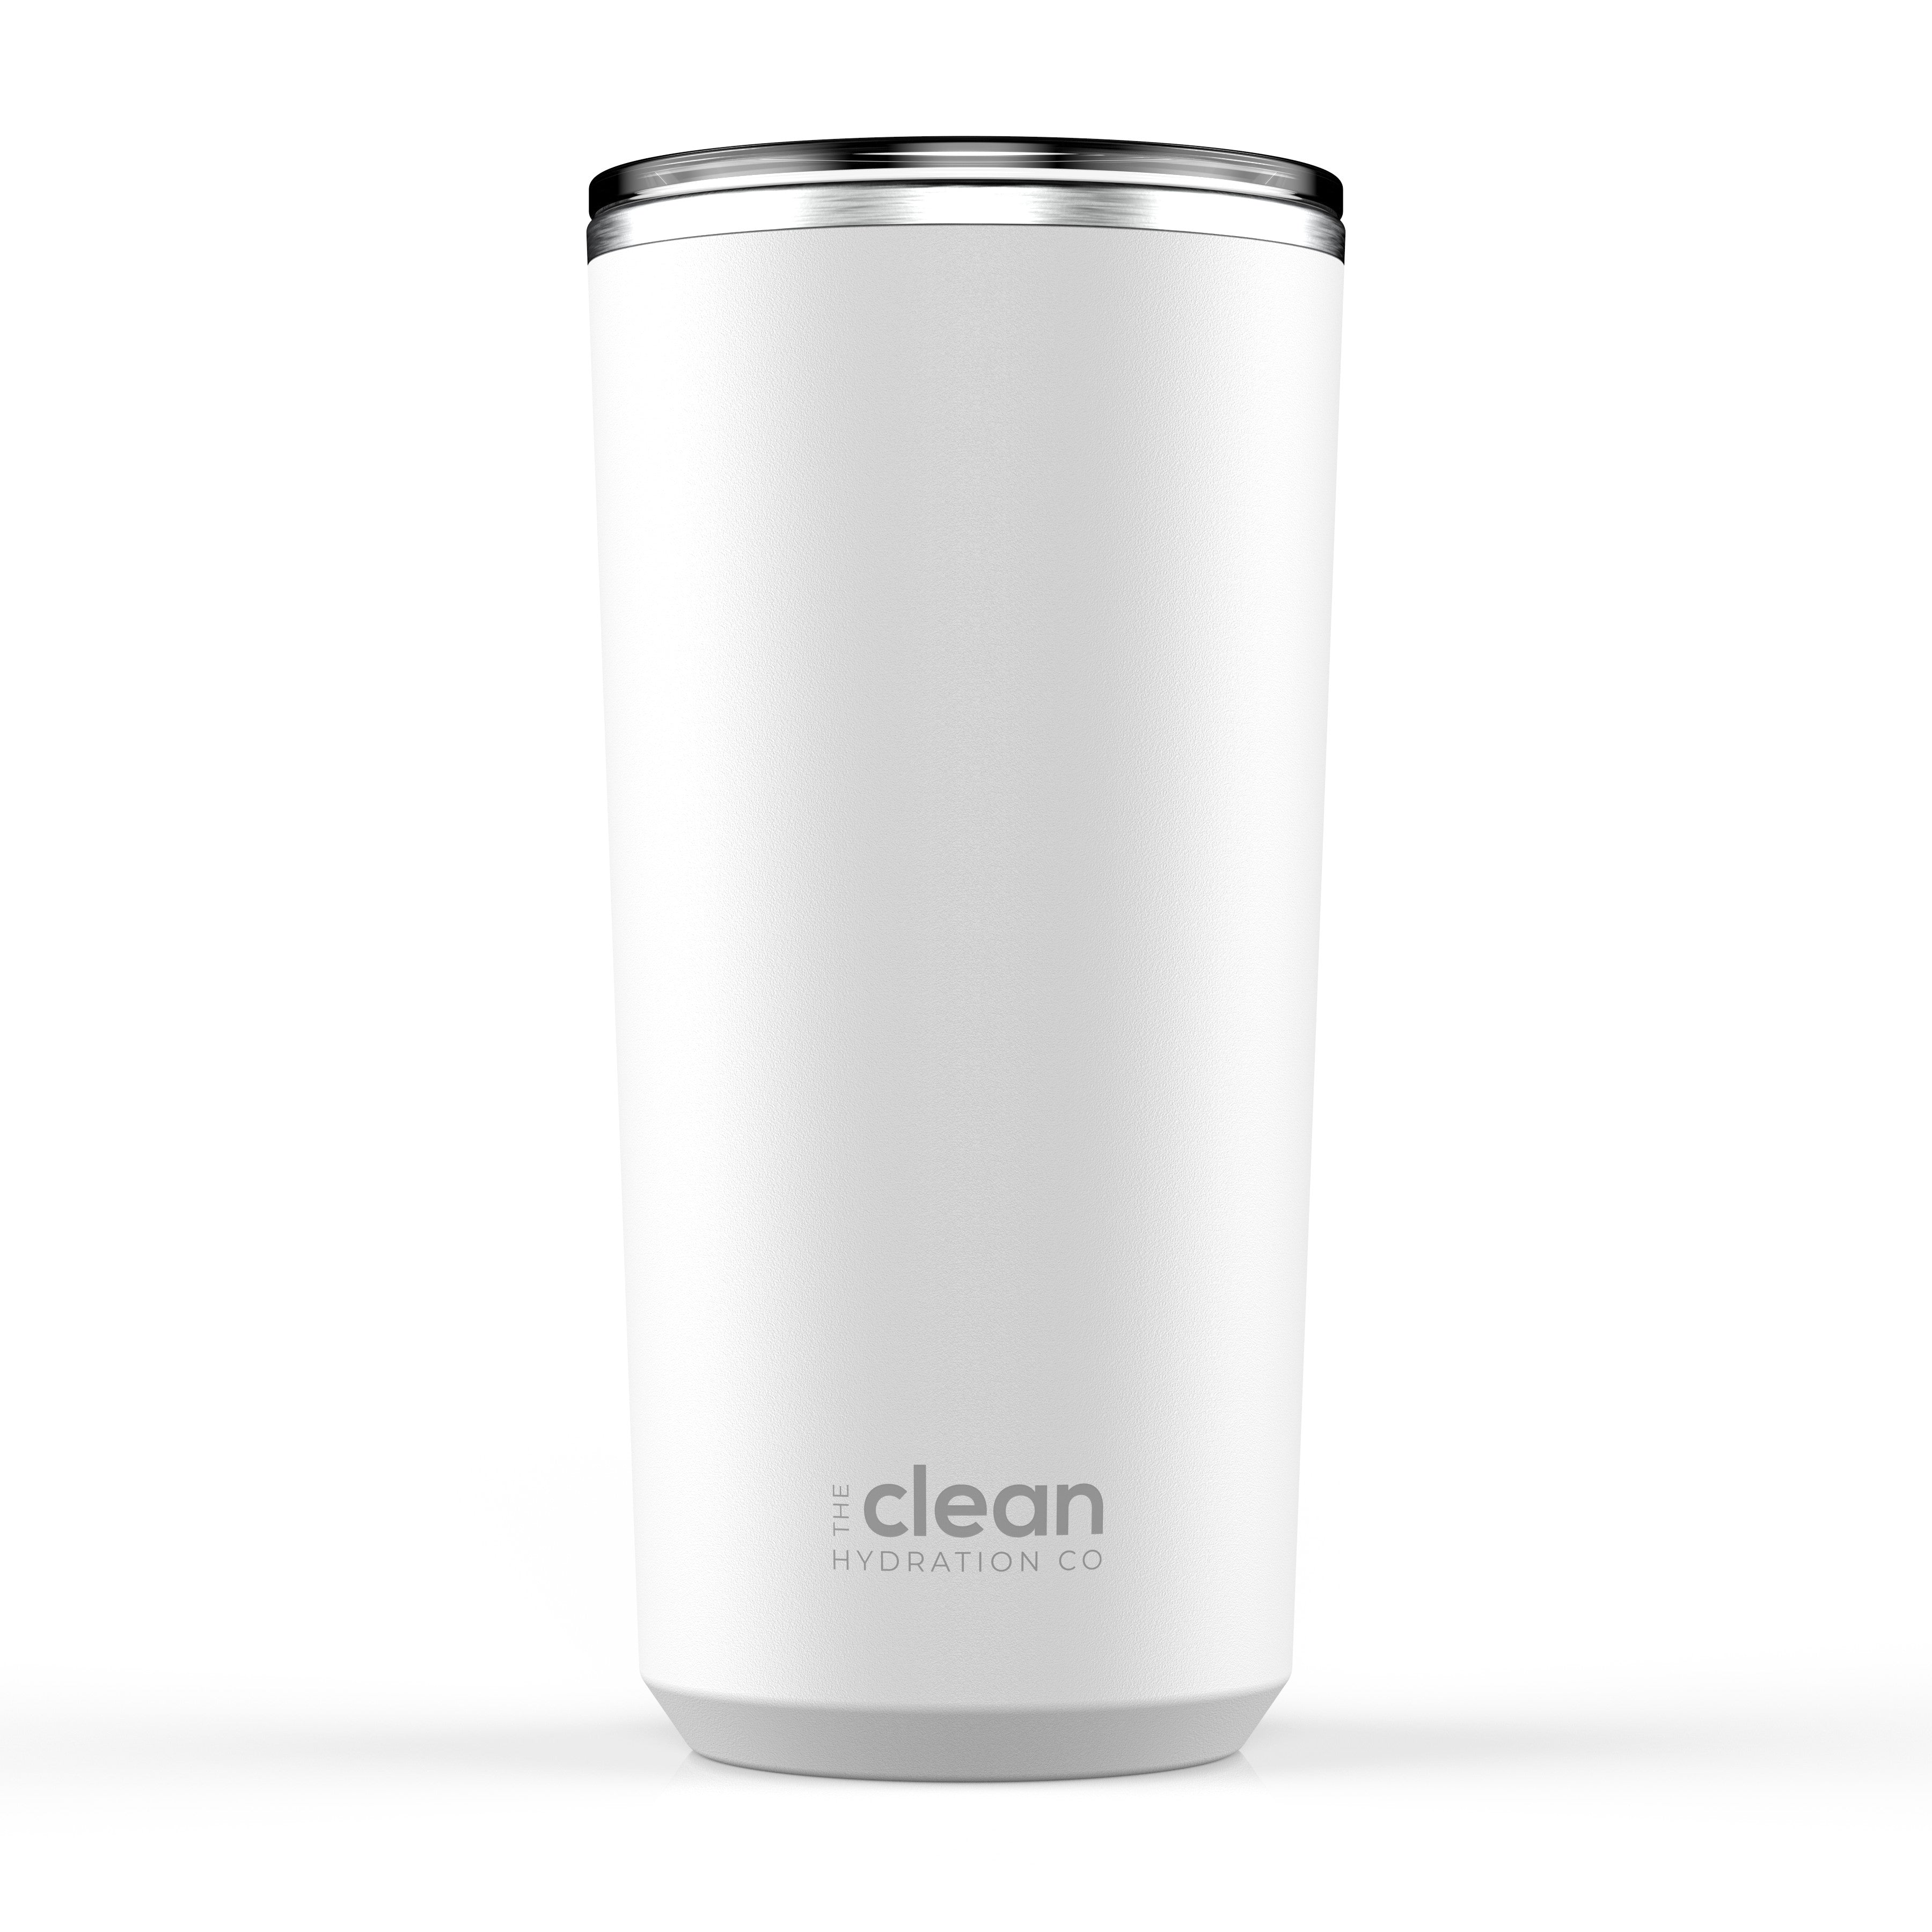 The Clean Hydration TUM20002 20 oz Insulated Stainless Steel Travel Mug Cup with Ceramic Inner Coating & No Metal Taste in Coffee - White